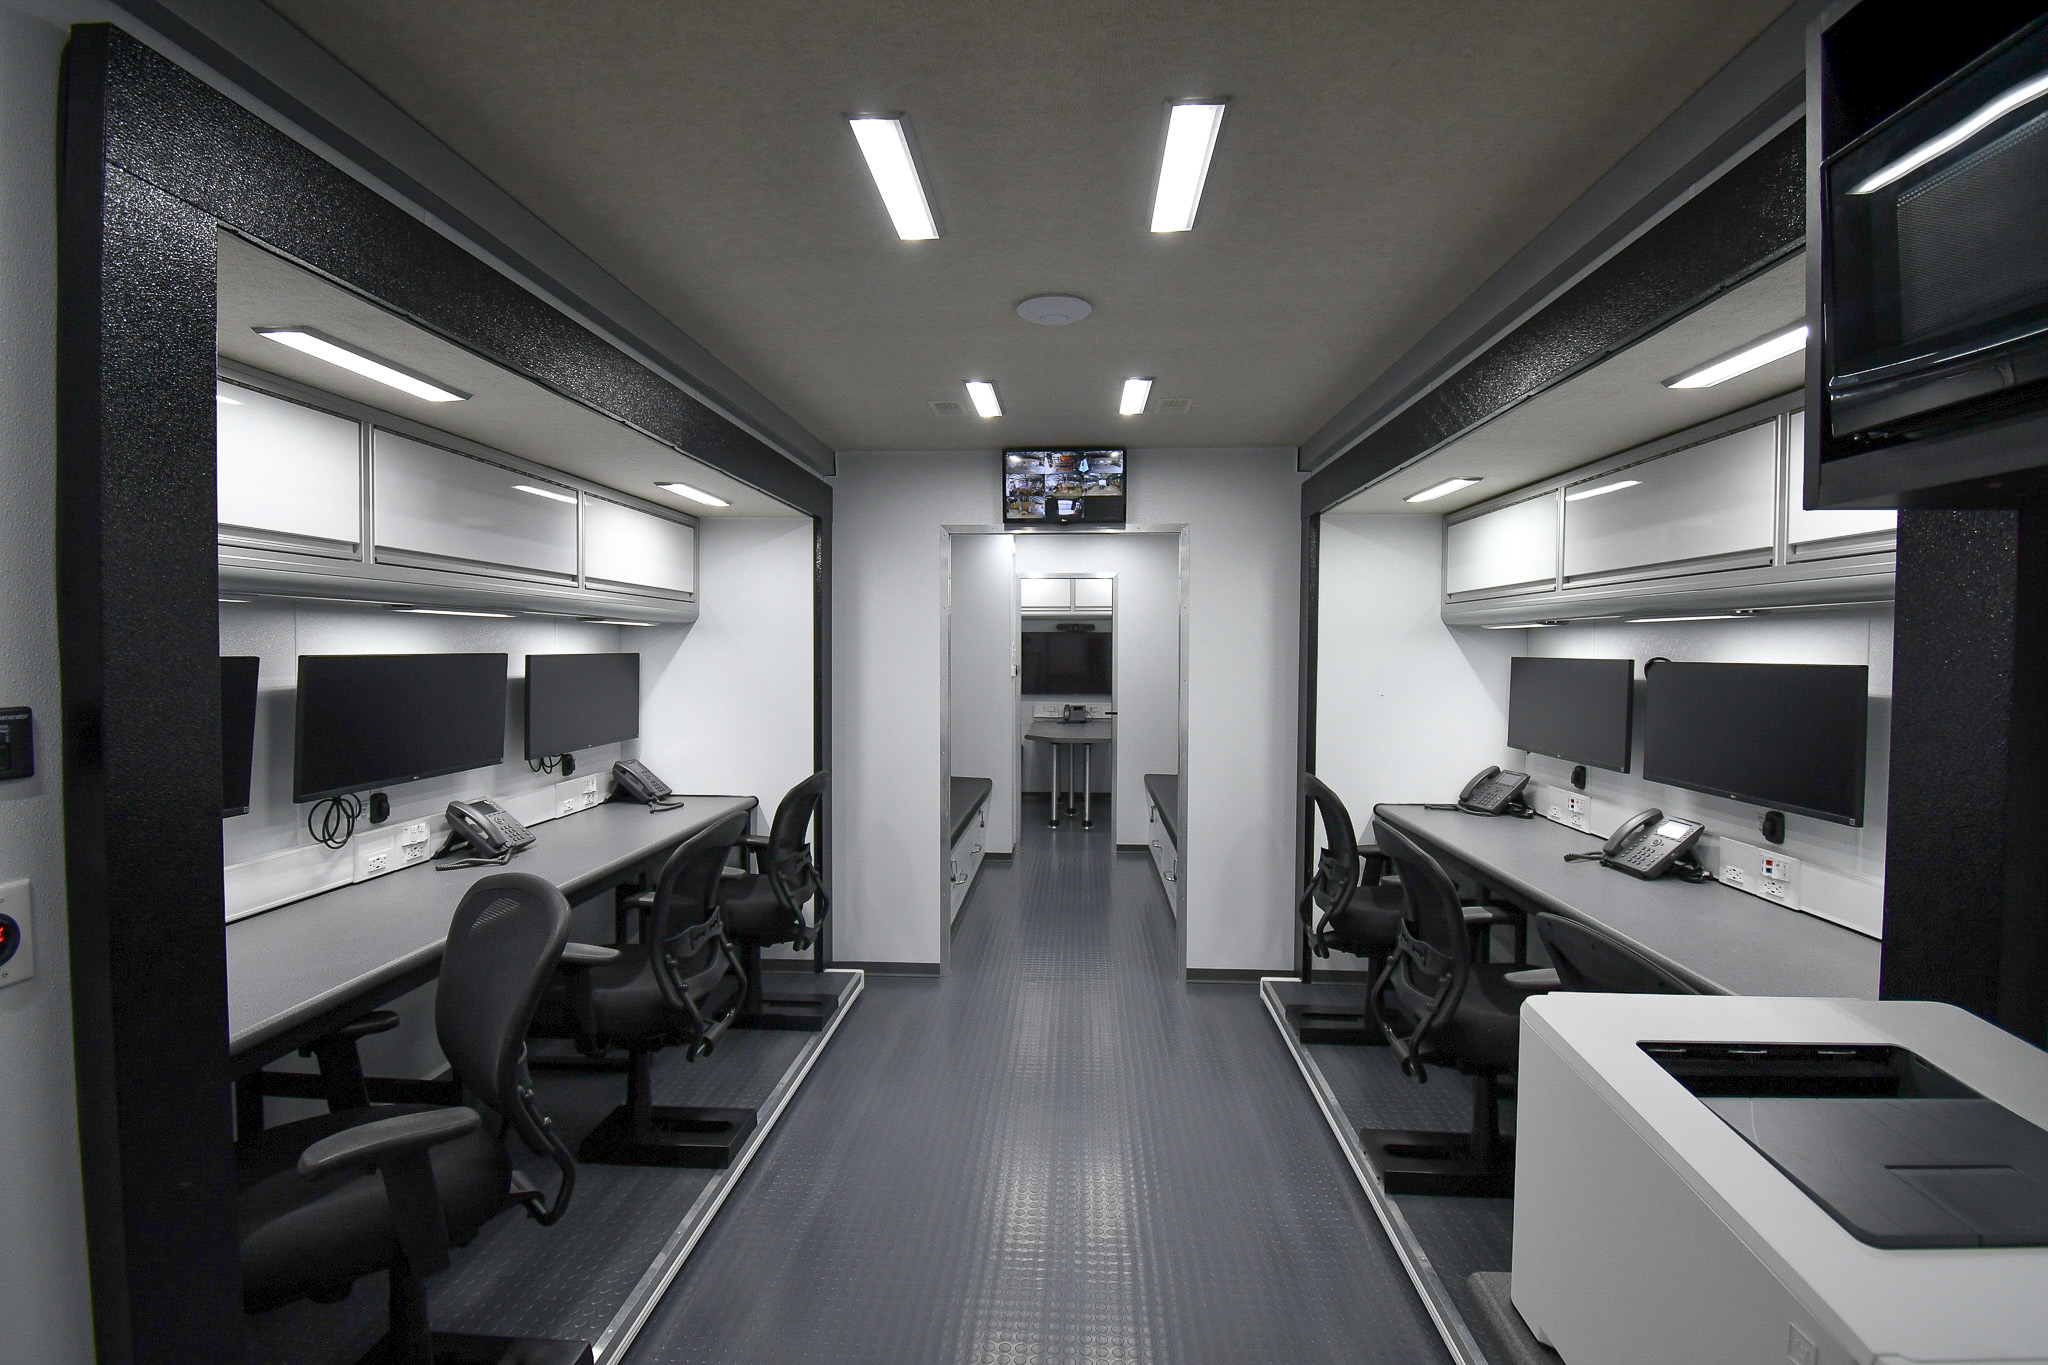 The six workstations inside the unit for New Orleans, LA.